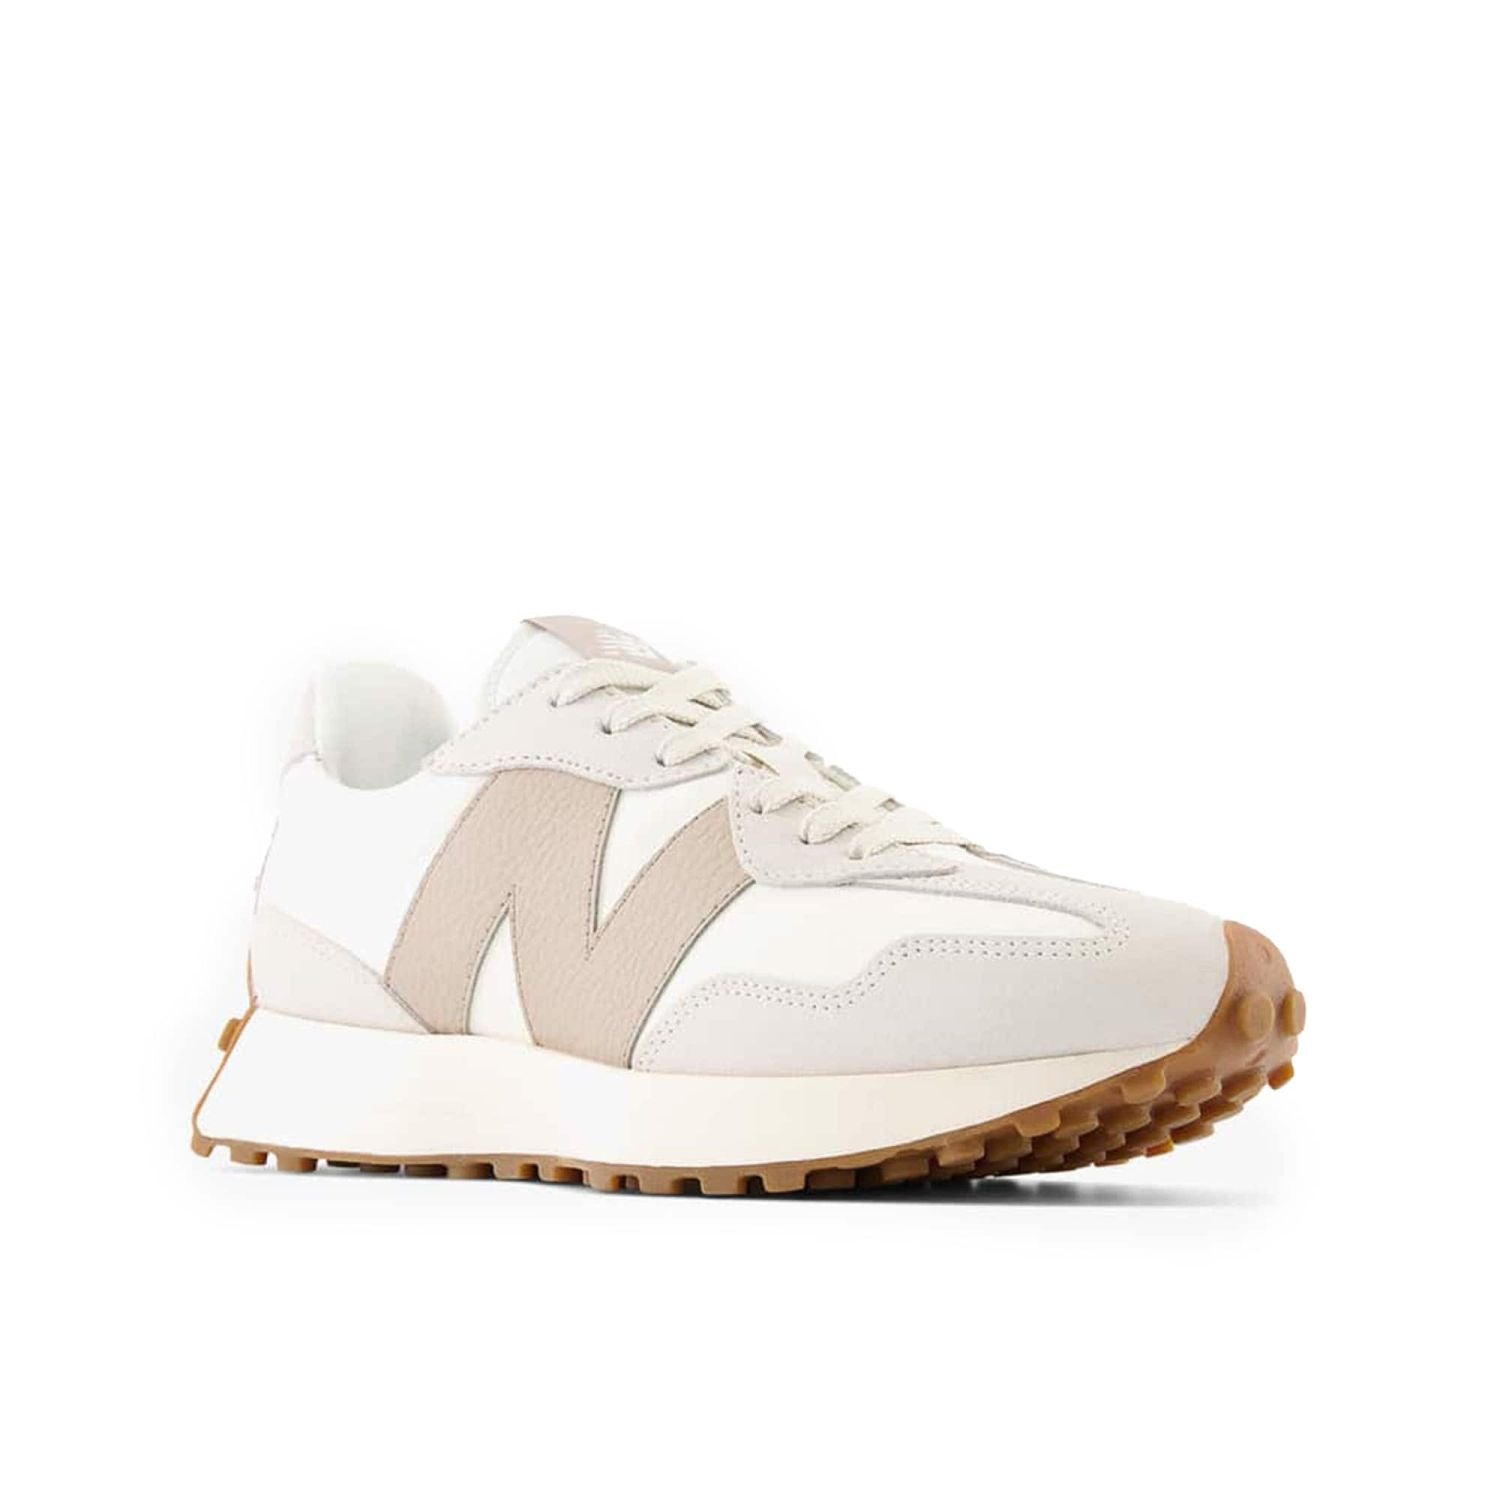 NEW BALANCE 327 UNISEX SNEAKERS SHOES - BEIGE